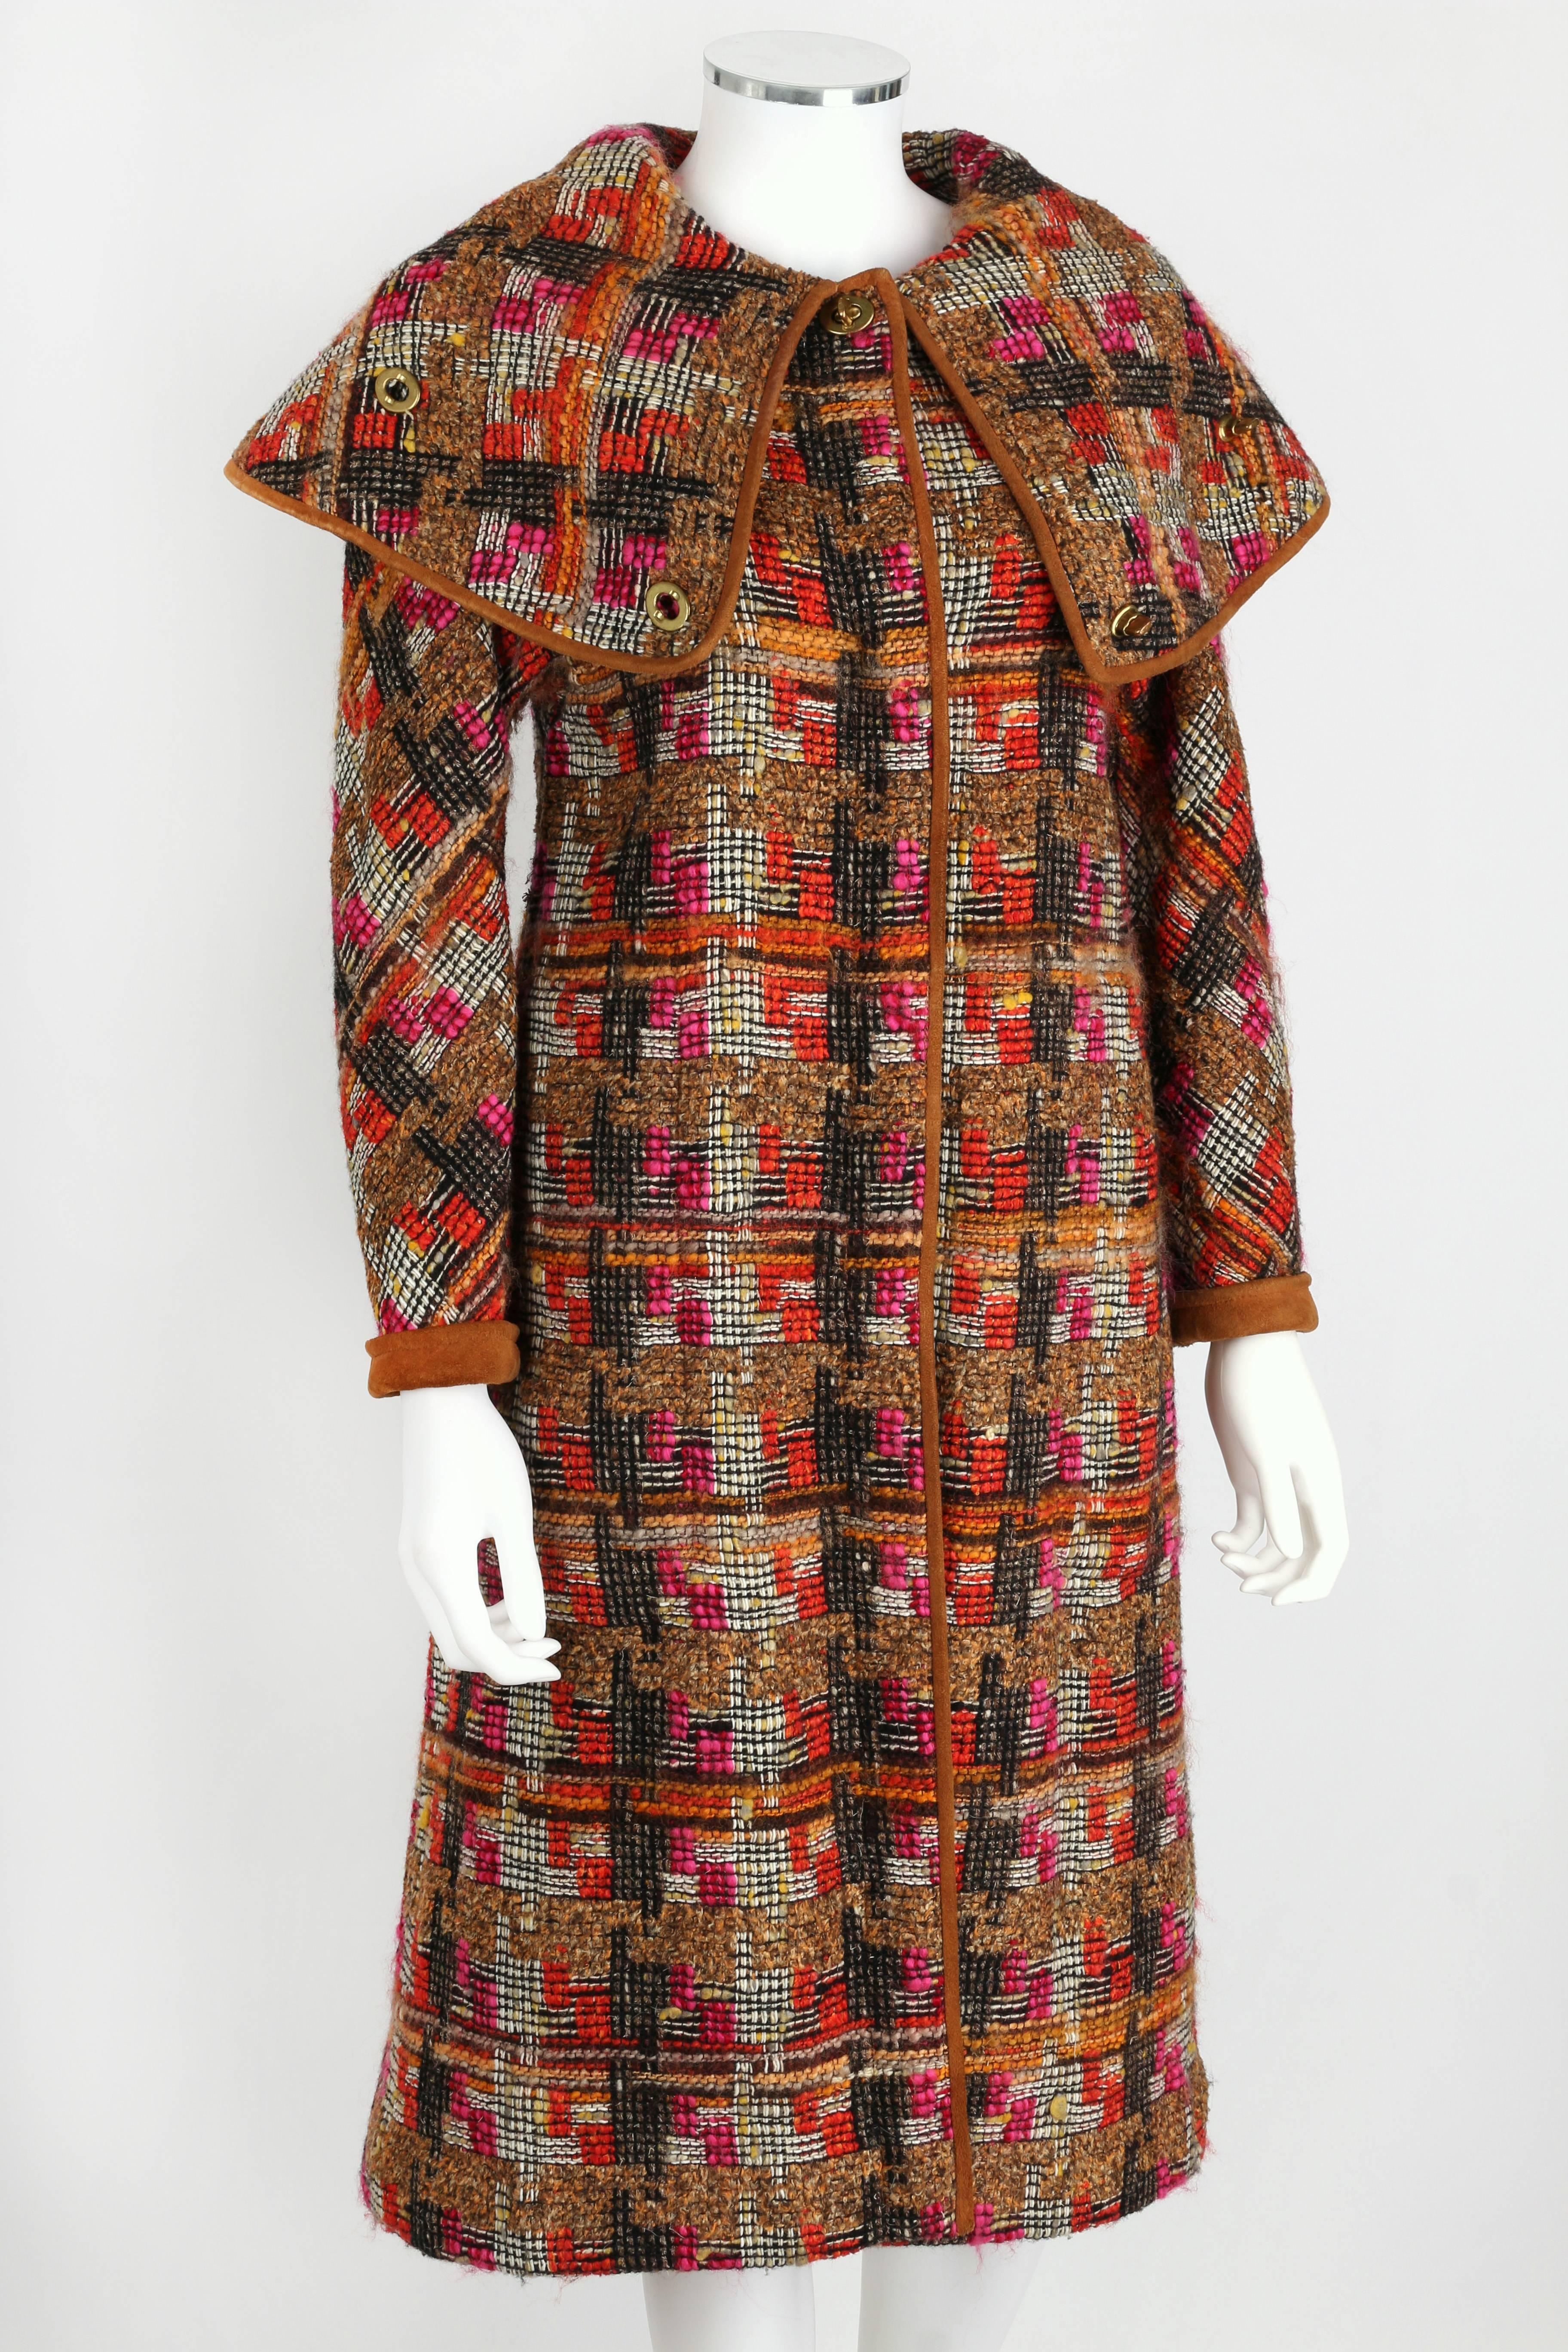 Vintage 1960s Bonnie Cashin for Sills multi-color boucle tweed cape coat. Large storm flap collar. Brown genuine suede leather trim. Two pockets. Classic COACH turn-lock and hidden snap closures. Also contains a tag for Cele Peterson, Tuscon.